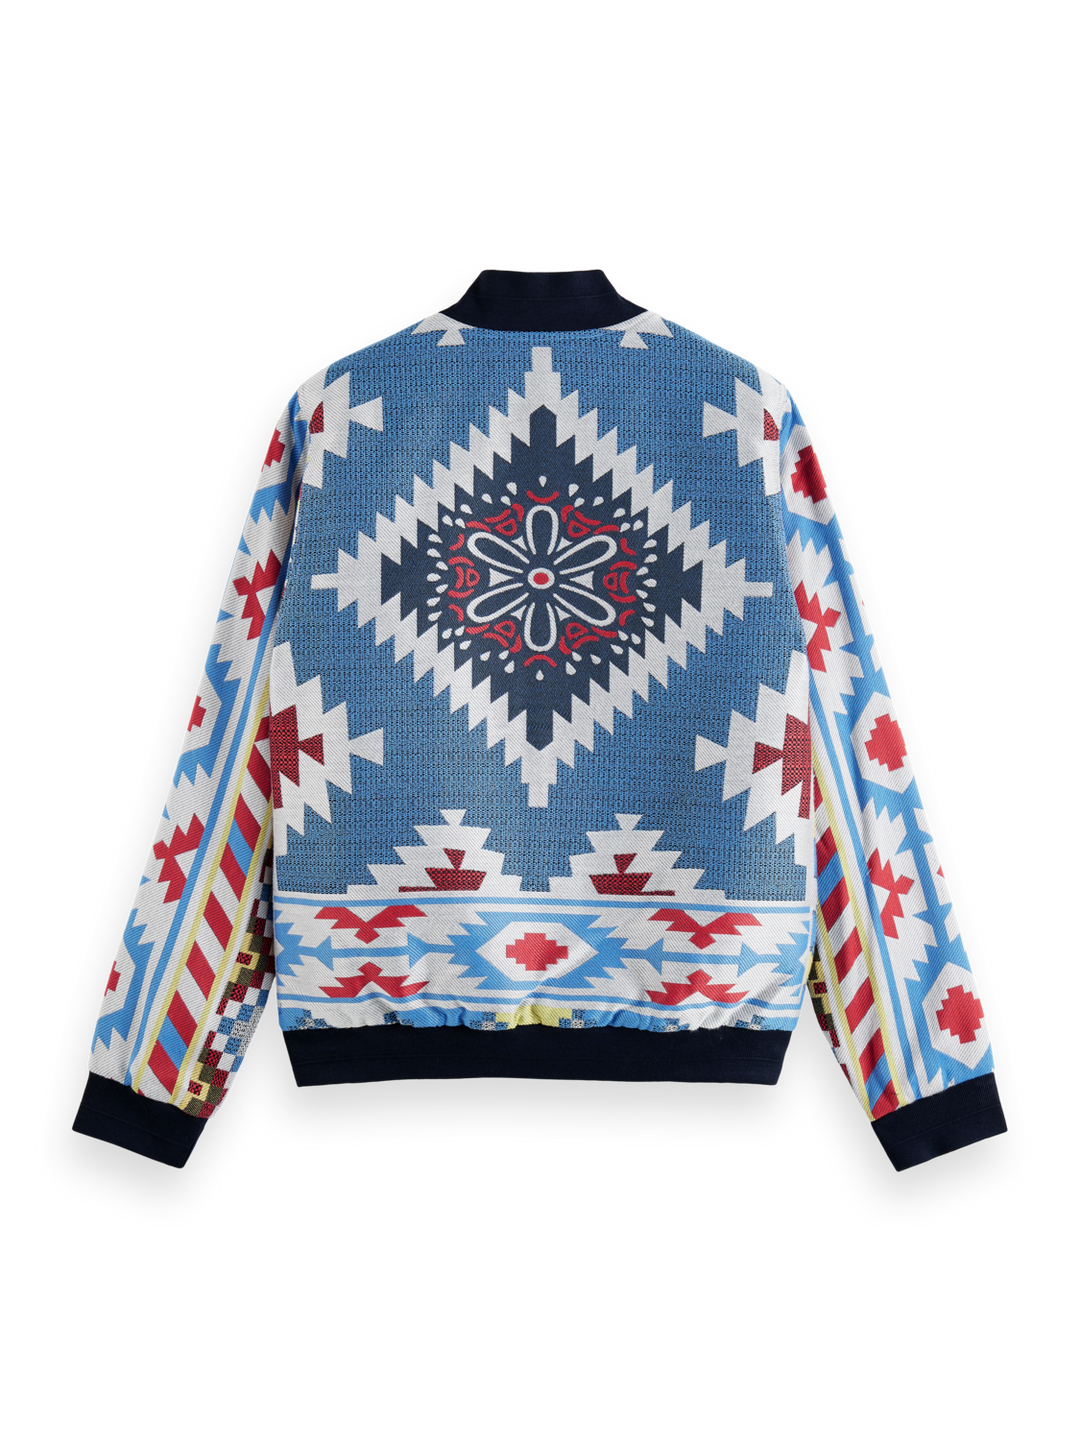 Jacquard Bomber Jacket in Multicolour Jacquard | Buster McGee